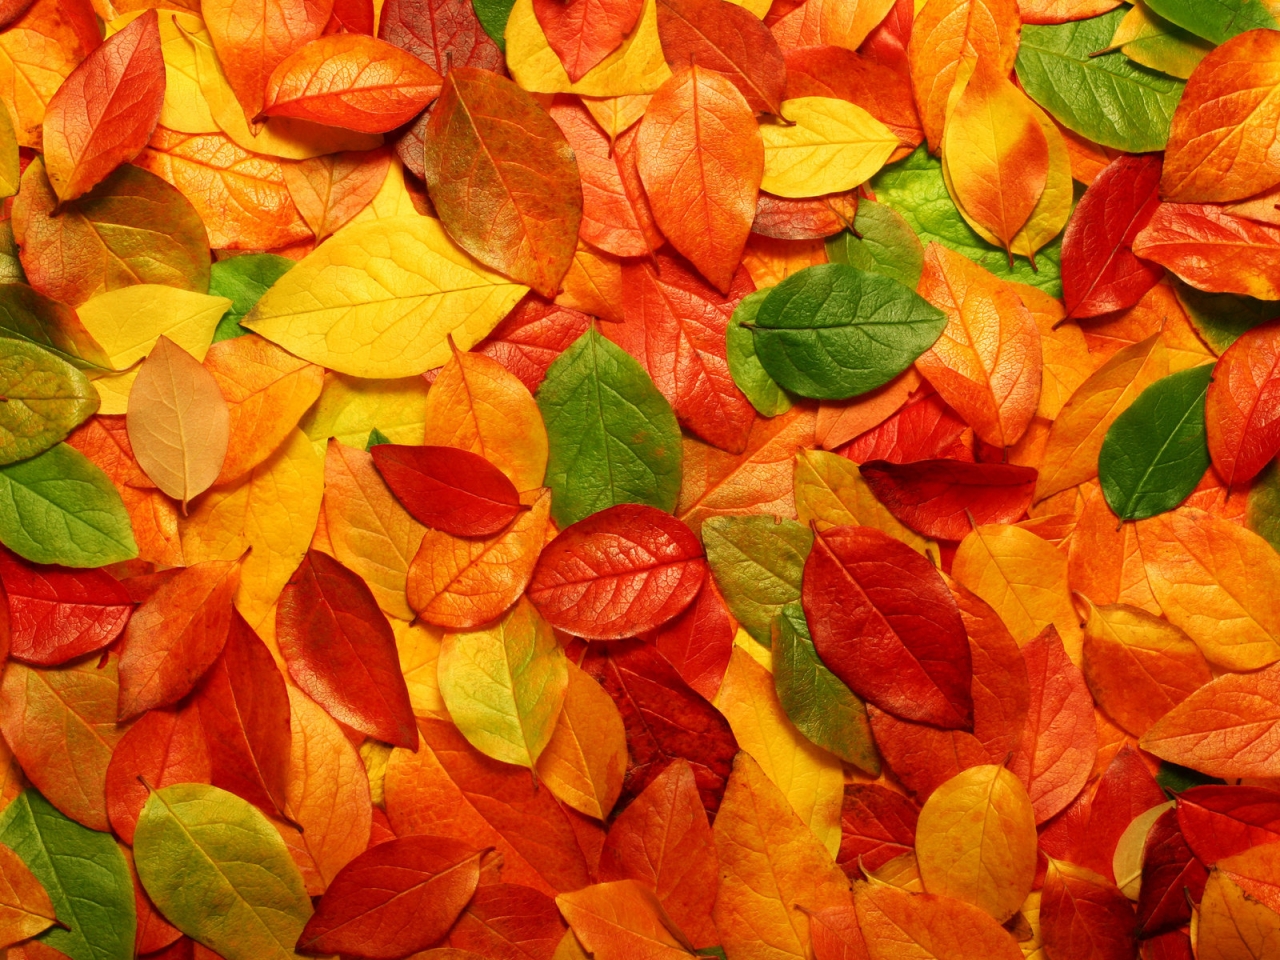 Autumn carpet of leaves for 1280 x 960 resolution